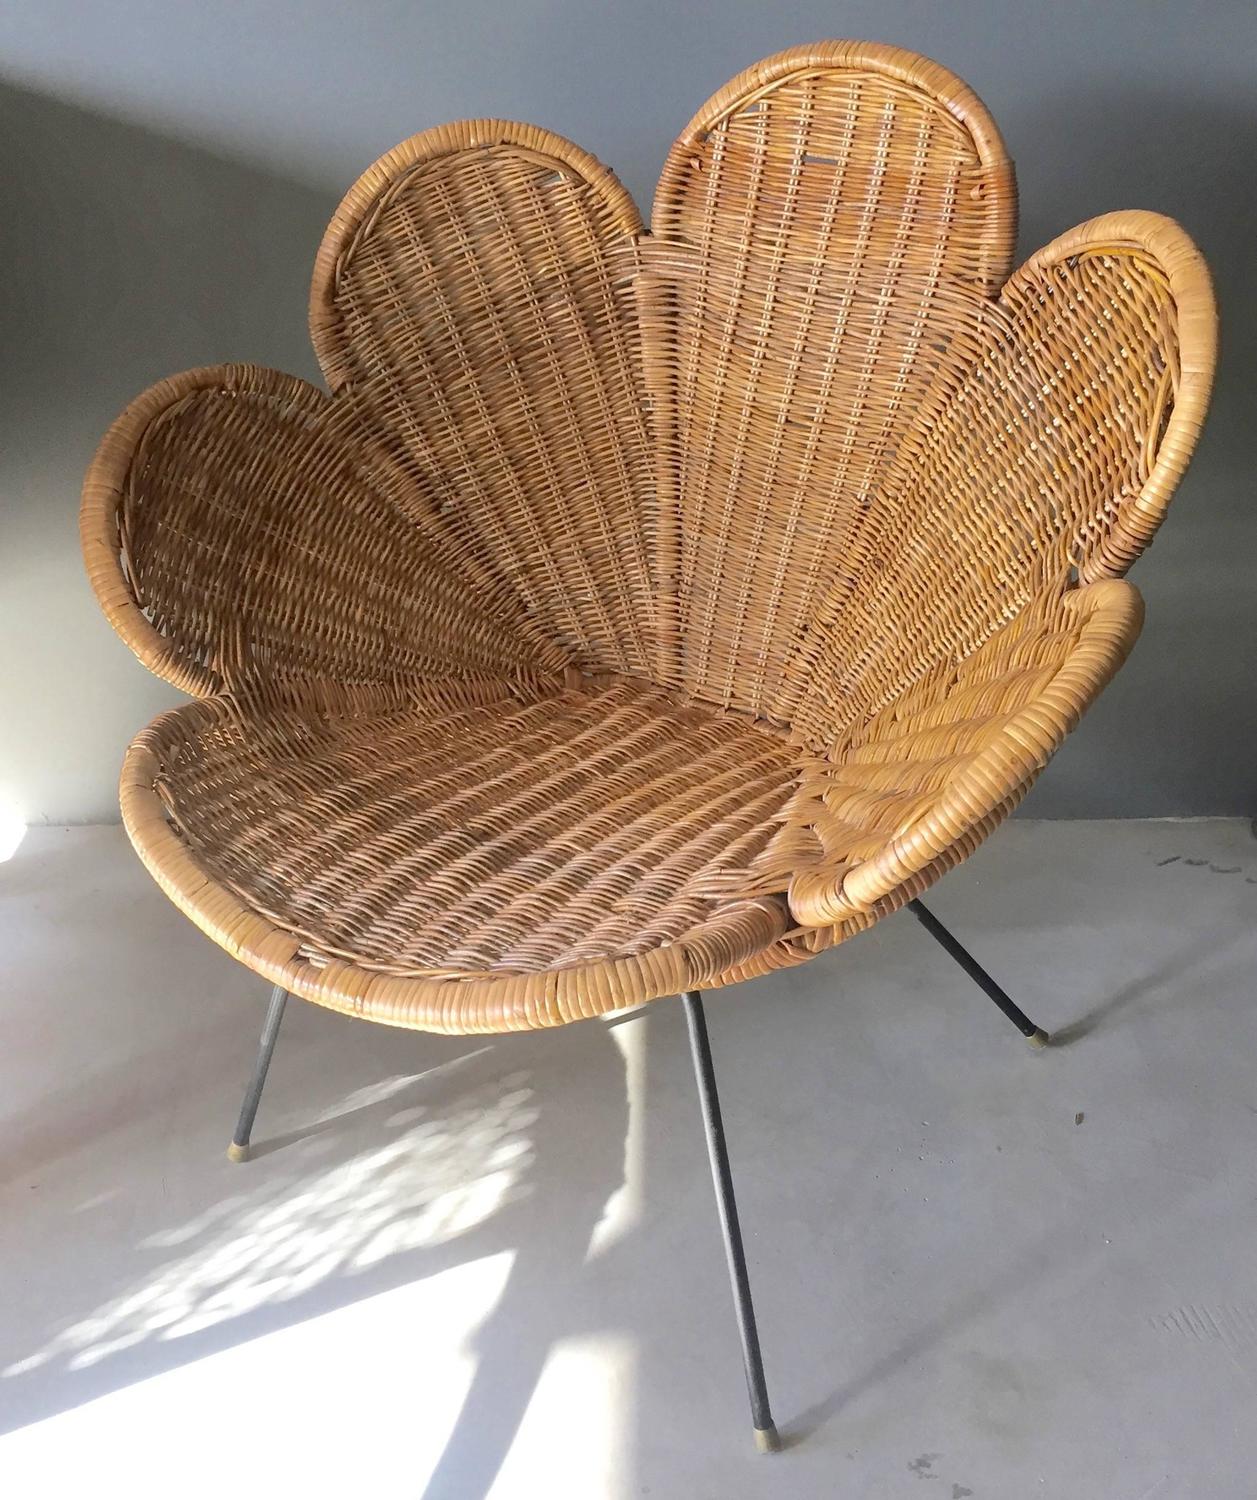 Rattan and Iron Flower Chair For Sale at 1stdibs